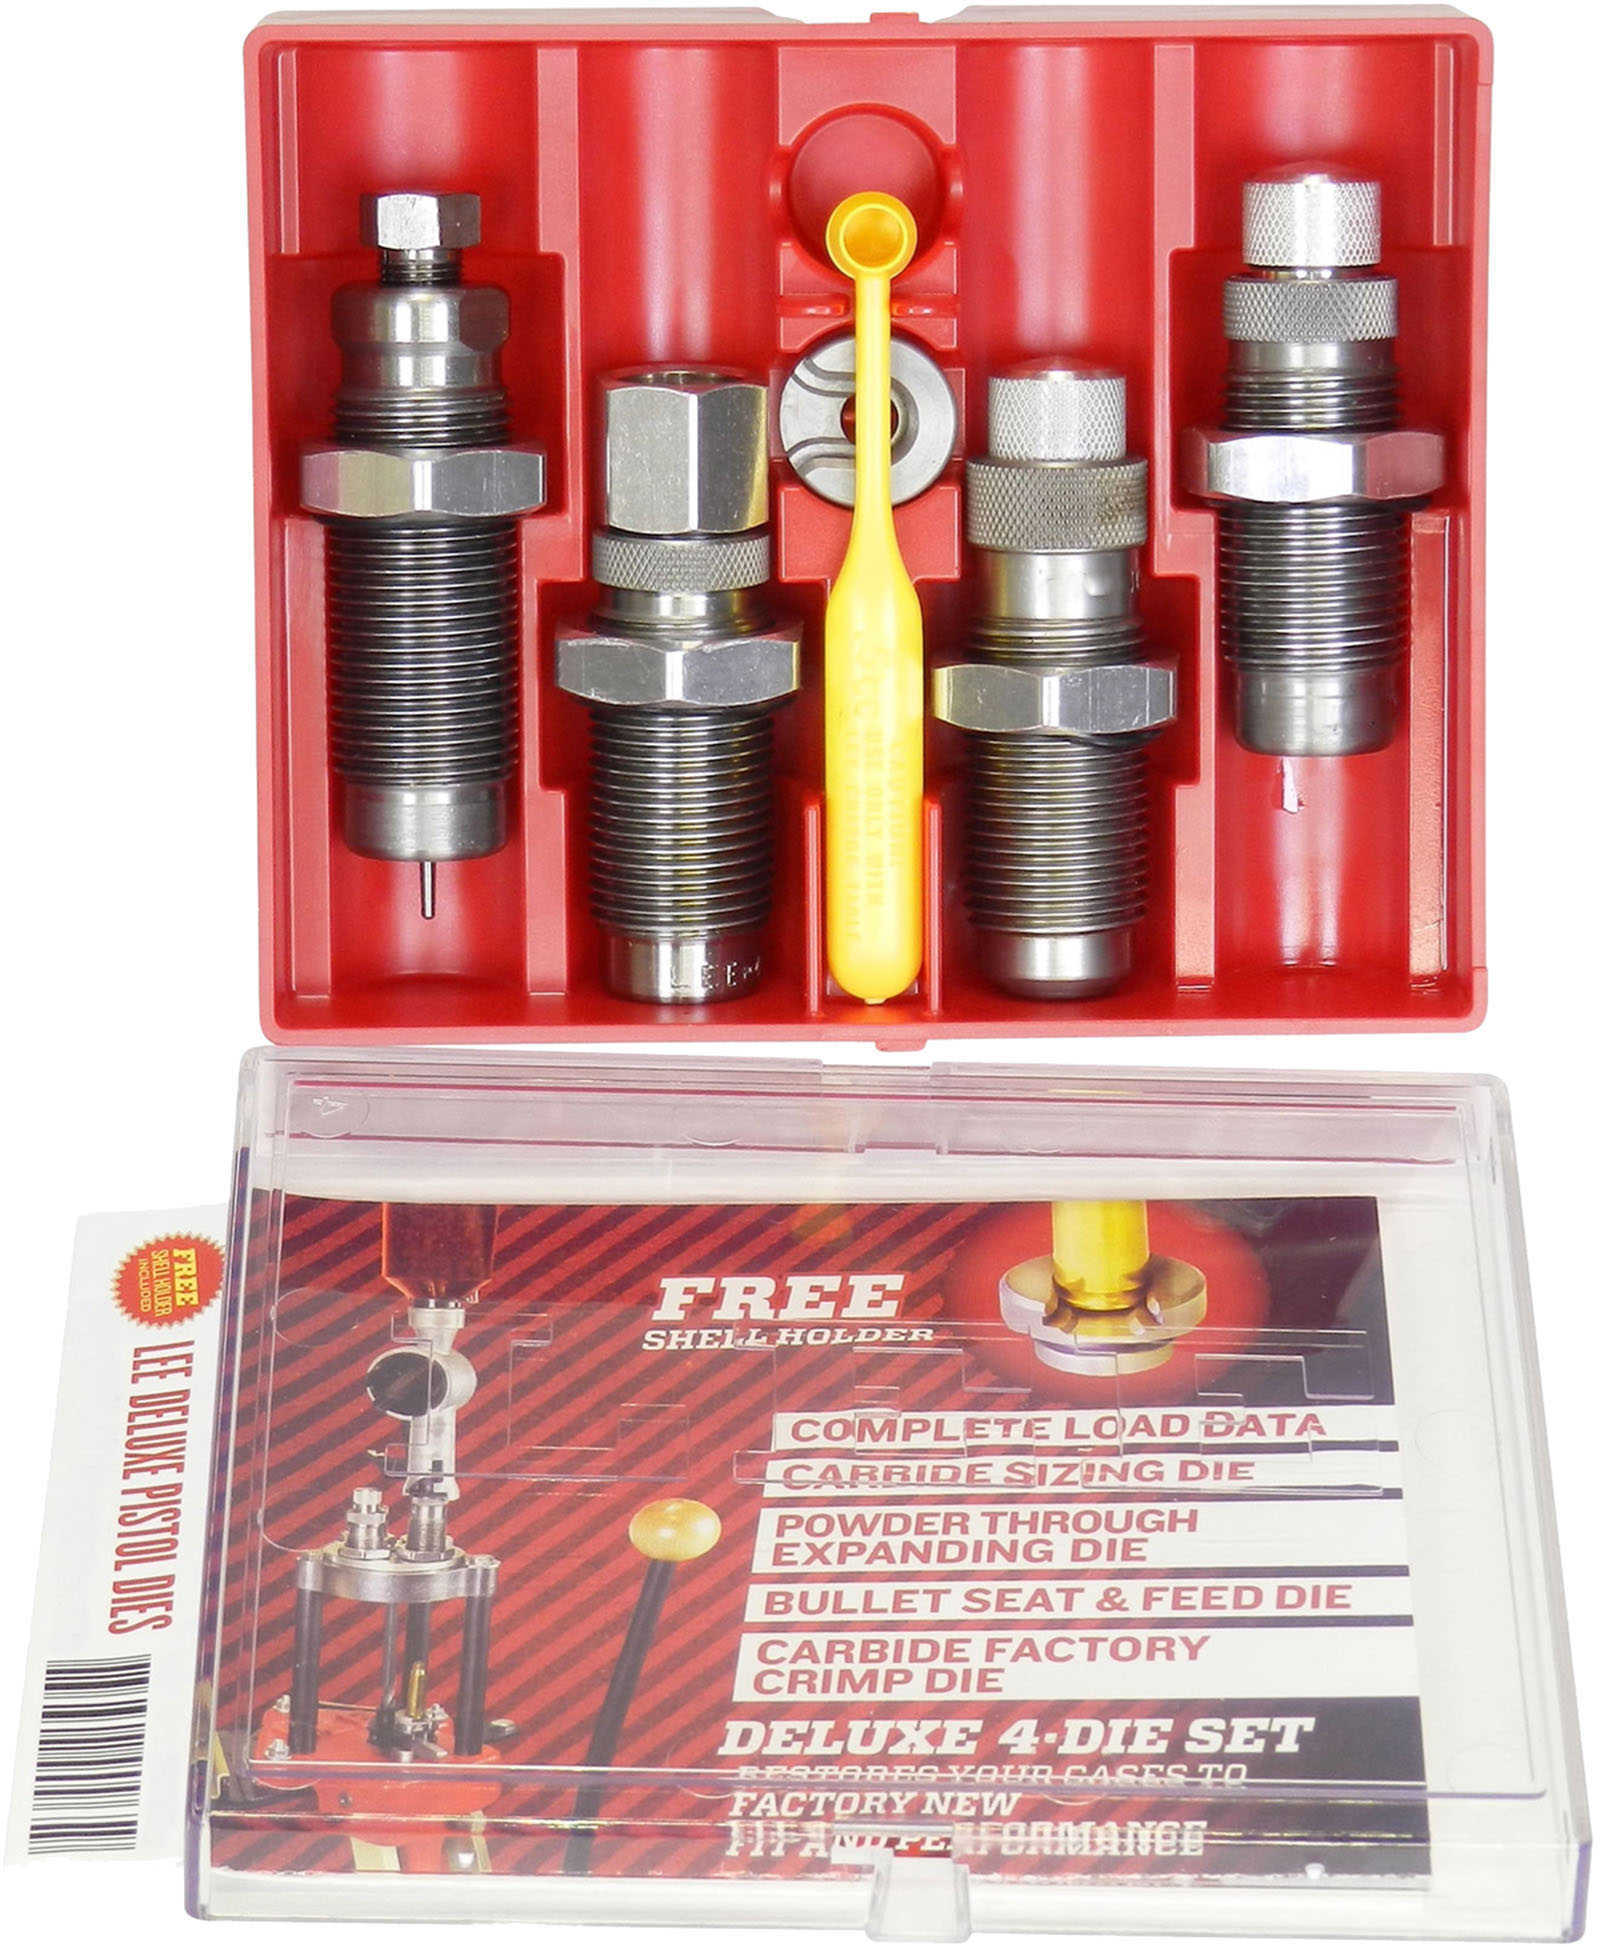 Lee Deluxe Pistol Carbide 4-Die Set With Shellholder For 38 Special Md: 90964